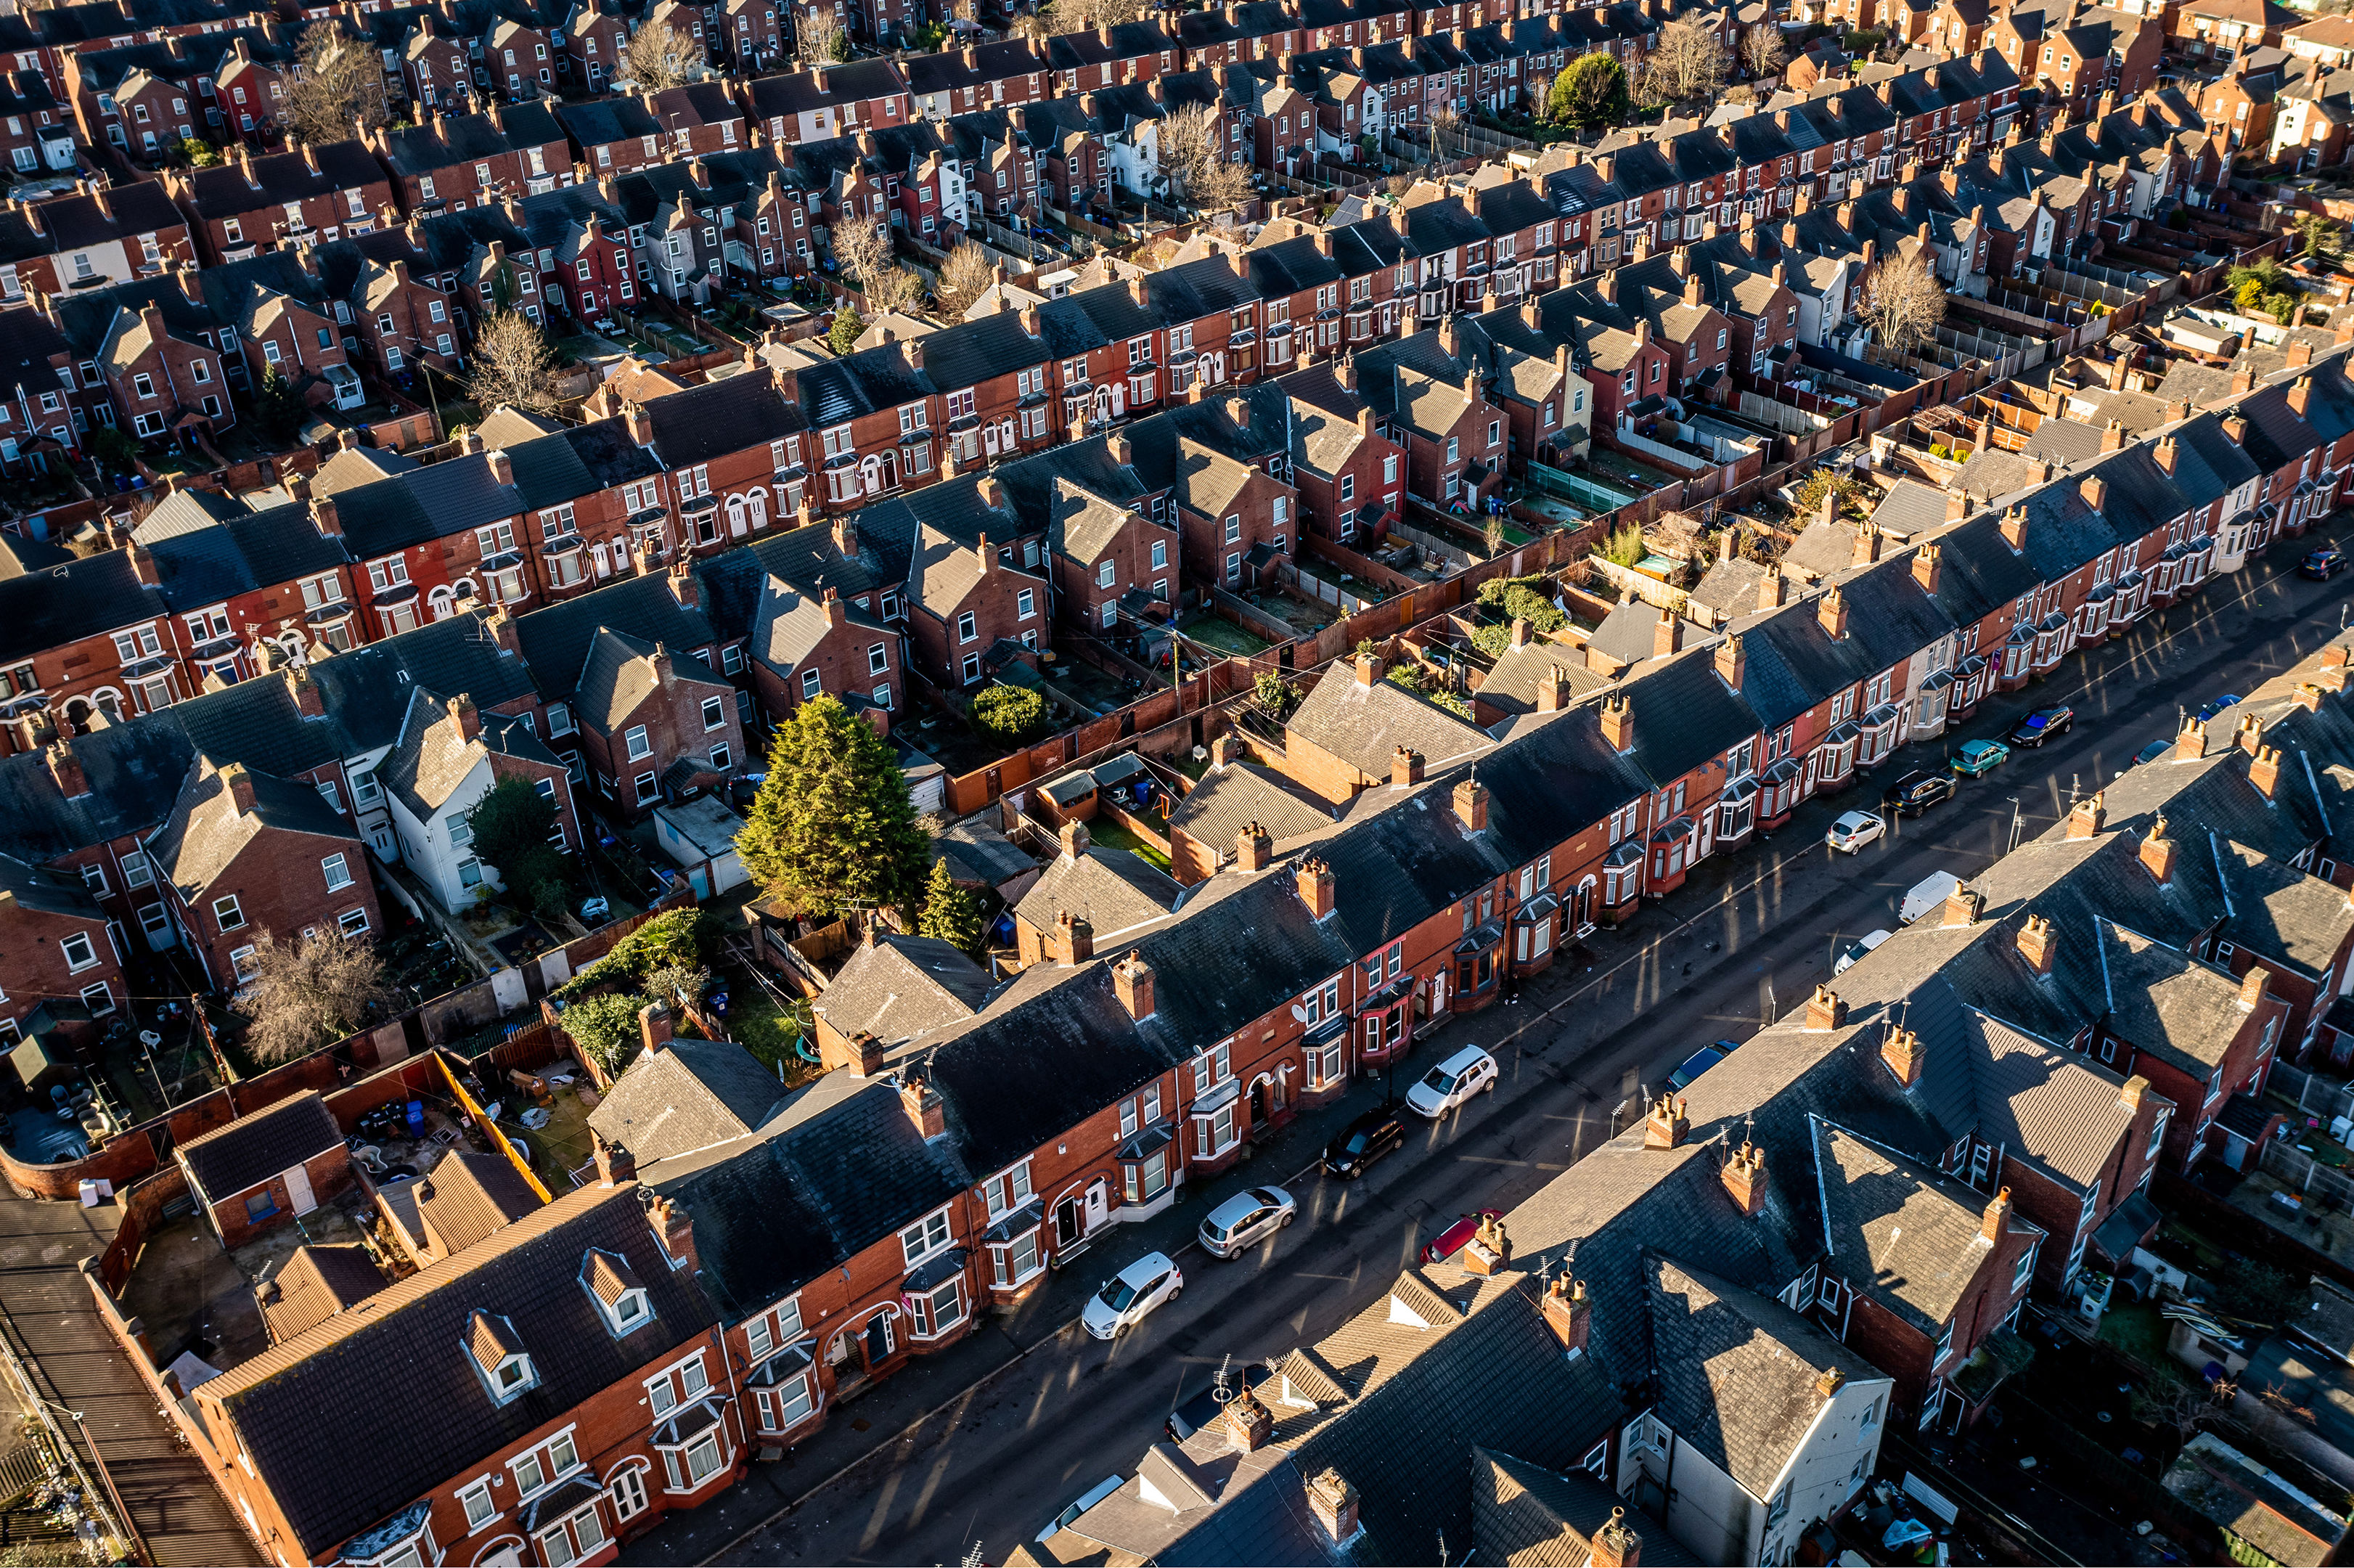 Aerial View Of The Rooftops Of Back To Back Terraced Houses